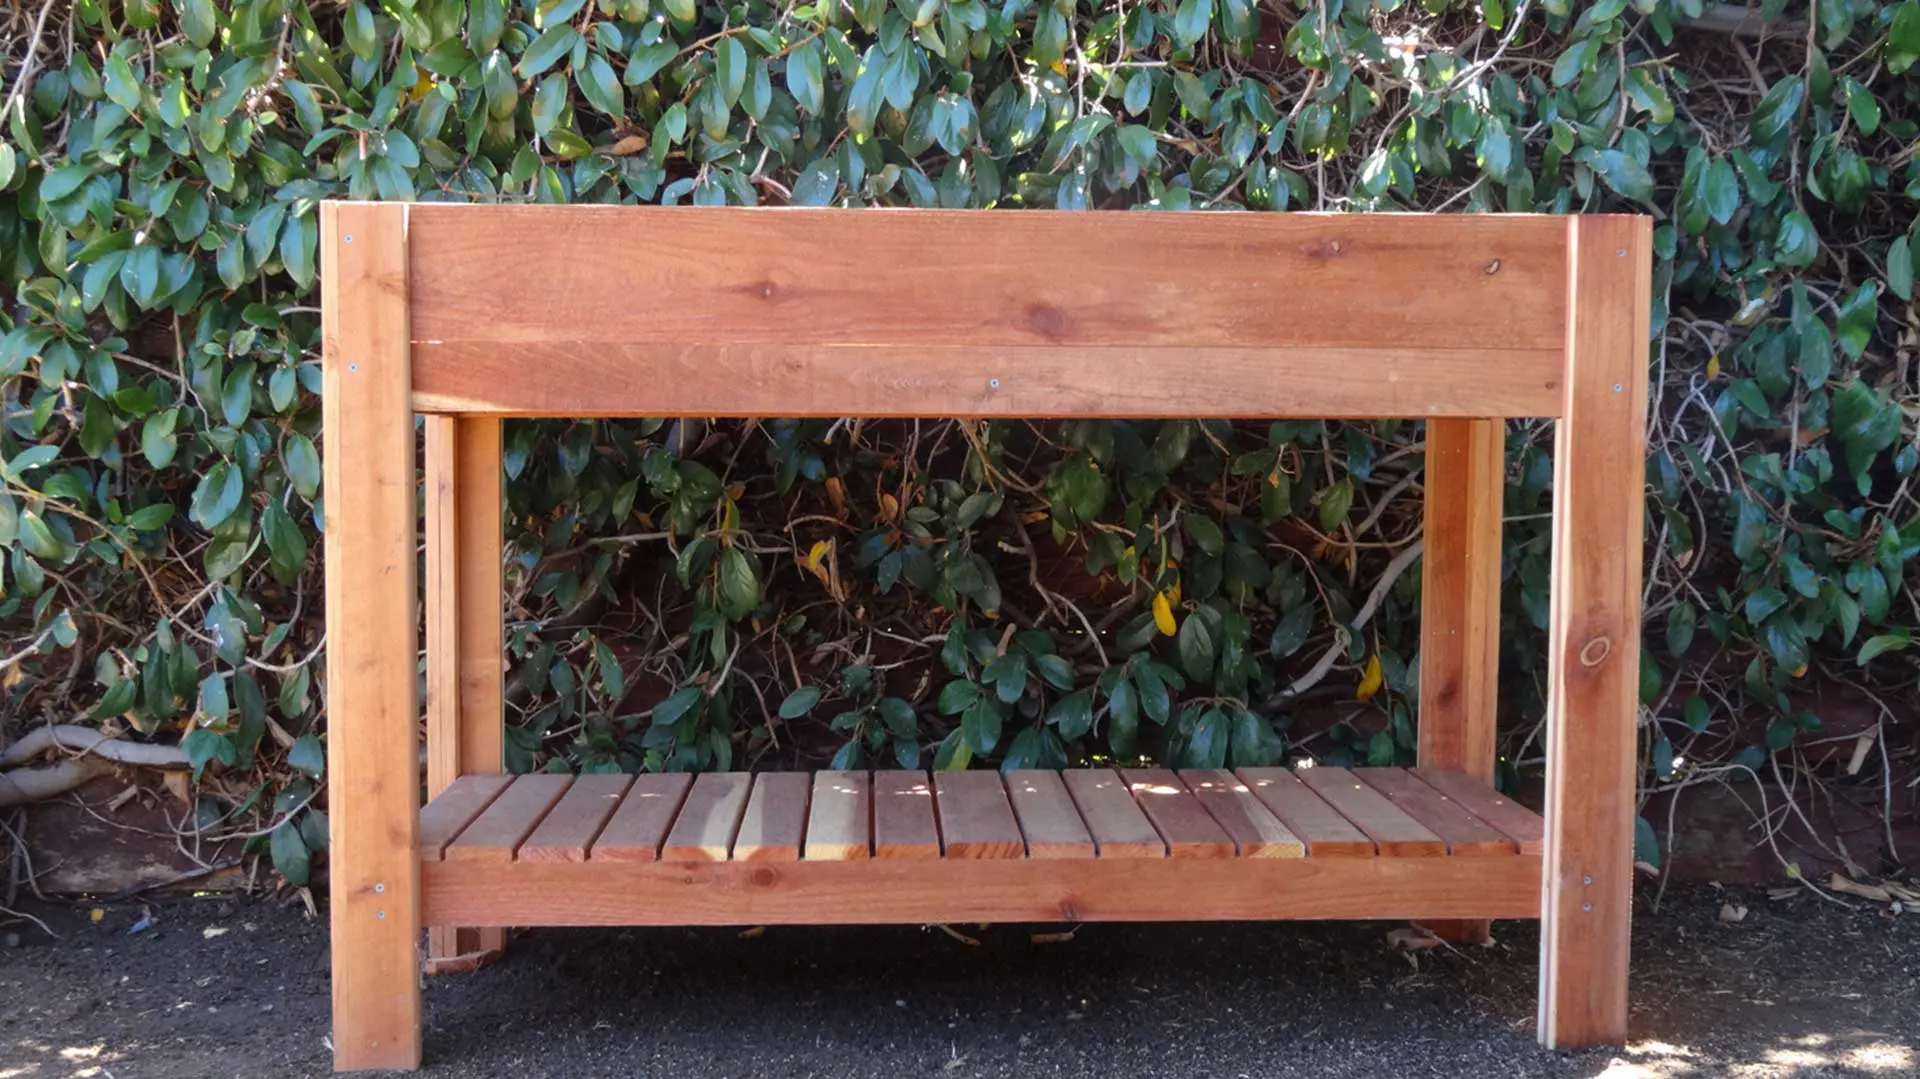 A wooden raised garden bed in front of bushes.